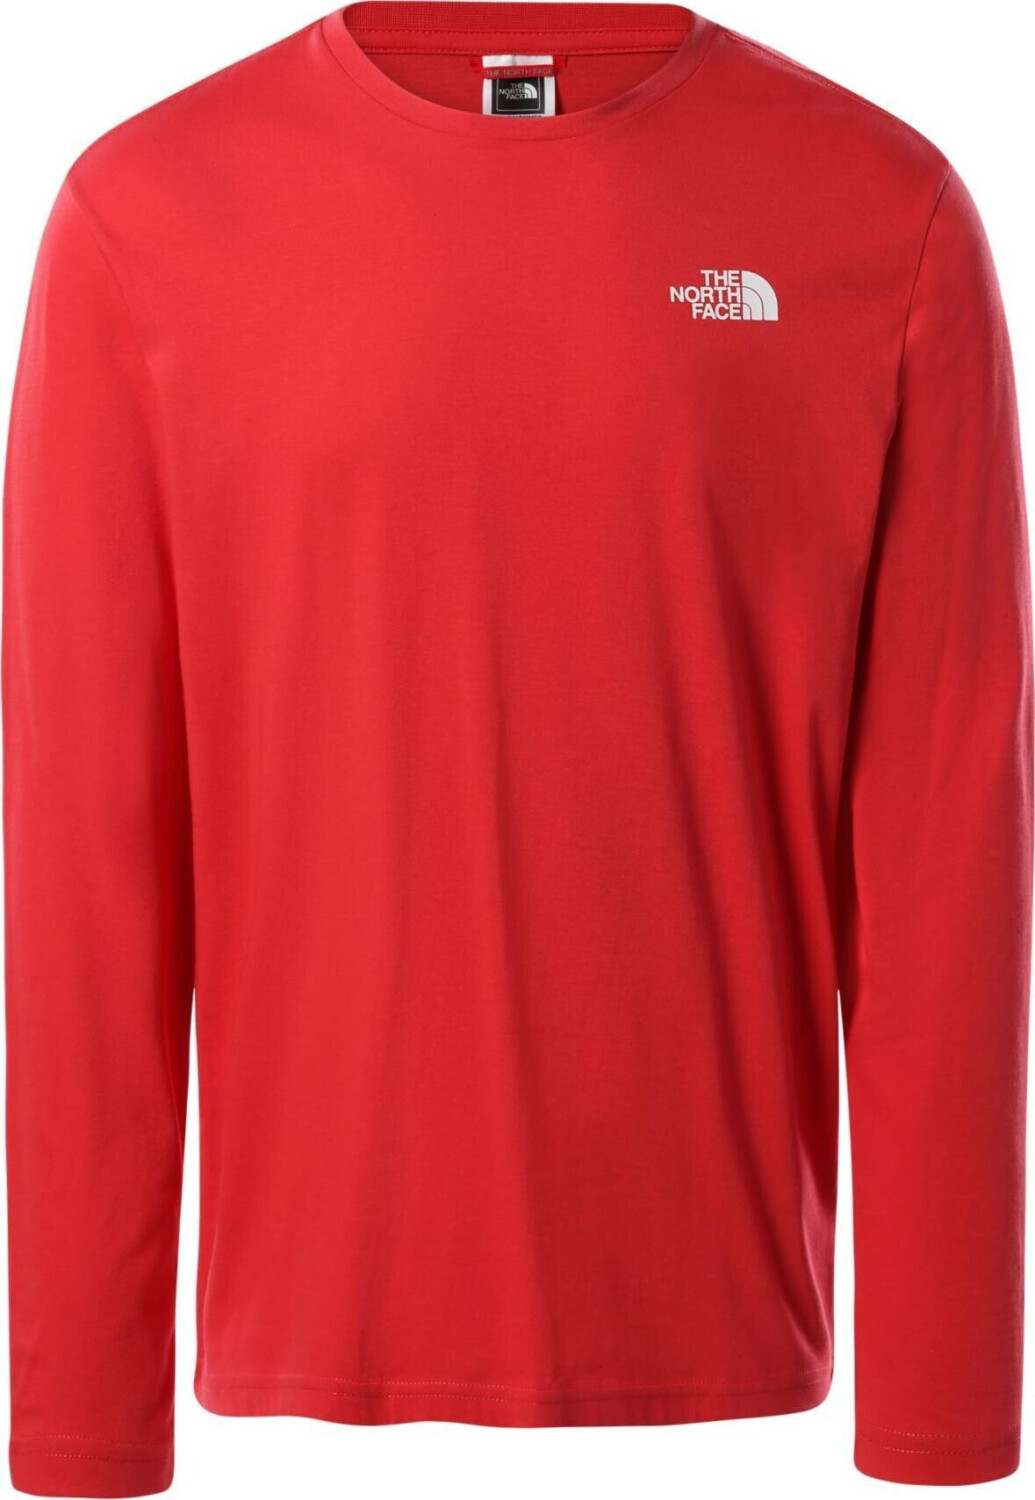 The North Face Men's Easy Long-Sleeve T-Shirt (2TX1) rococco red desde ...